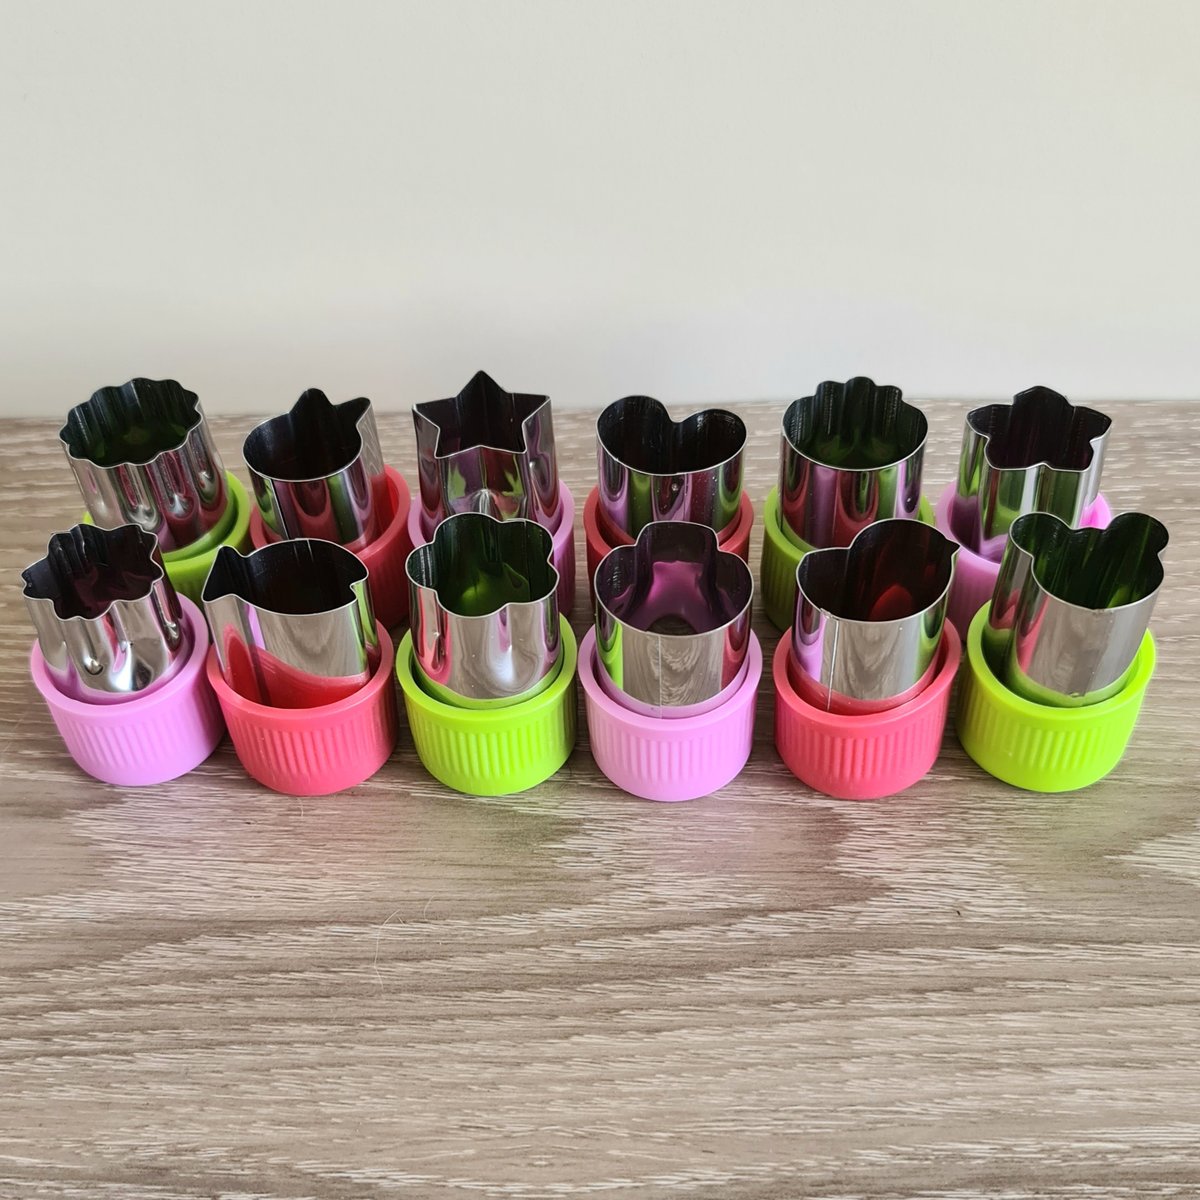 Little Giants 12 Set of Mini Fruit and Vegetable Cutters available at Bear & Moo